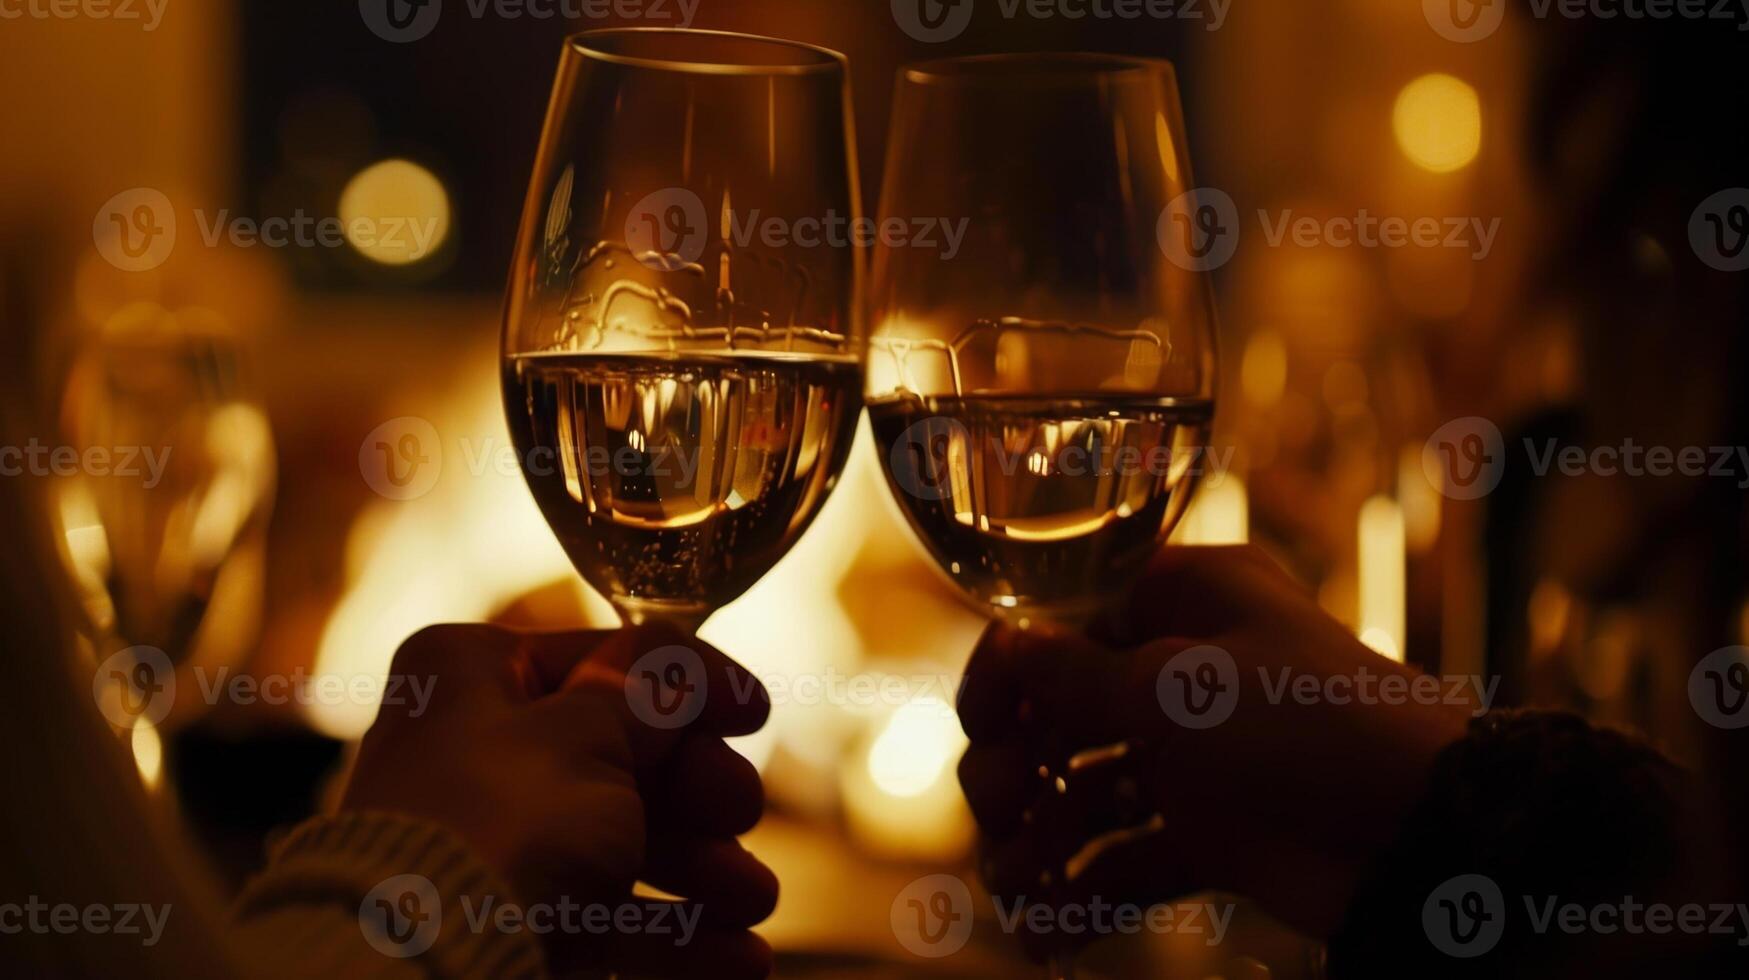 The evening stretches on with the only interruptions being the occasional stoke of the fire or the gentle clink of glasses as the couple sips their wine. 2d flat cartoon photo